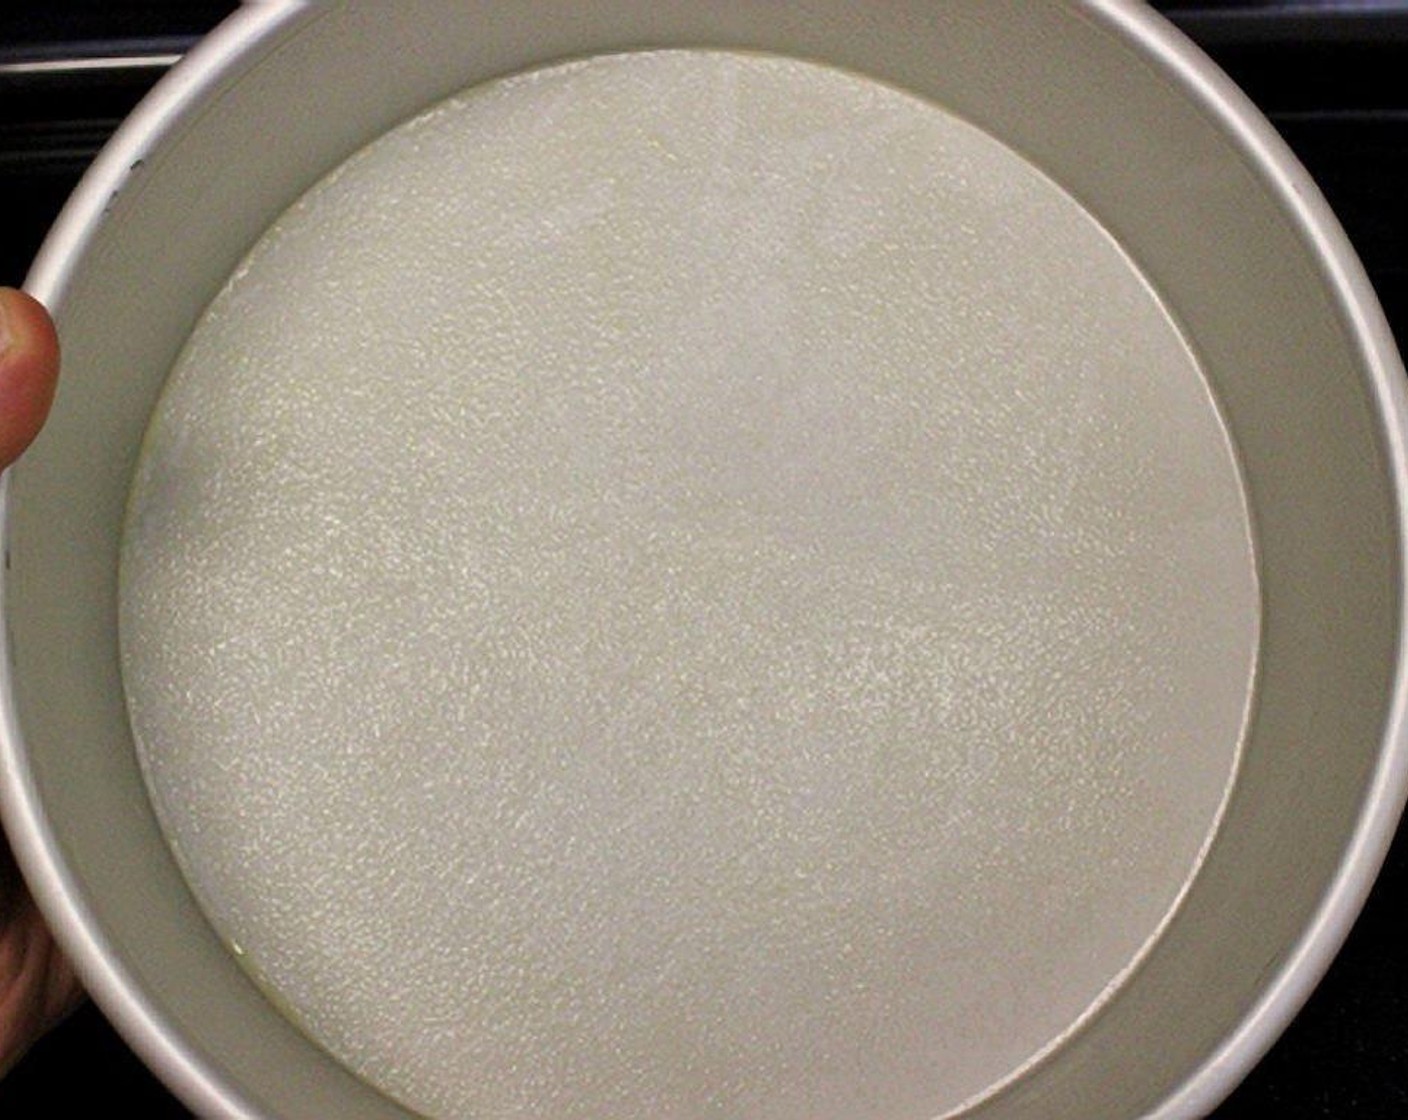 step 2 Grease and flour a 10-inch round cake pan. Line the bottom of the pan with parchment paper. Spray the top of the parchment paper with cooking spray or use butter/oil and flour to grease the pan.